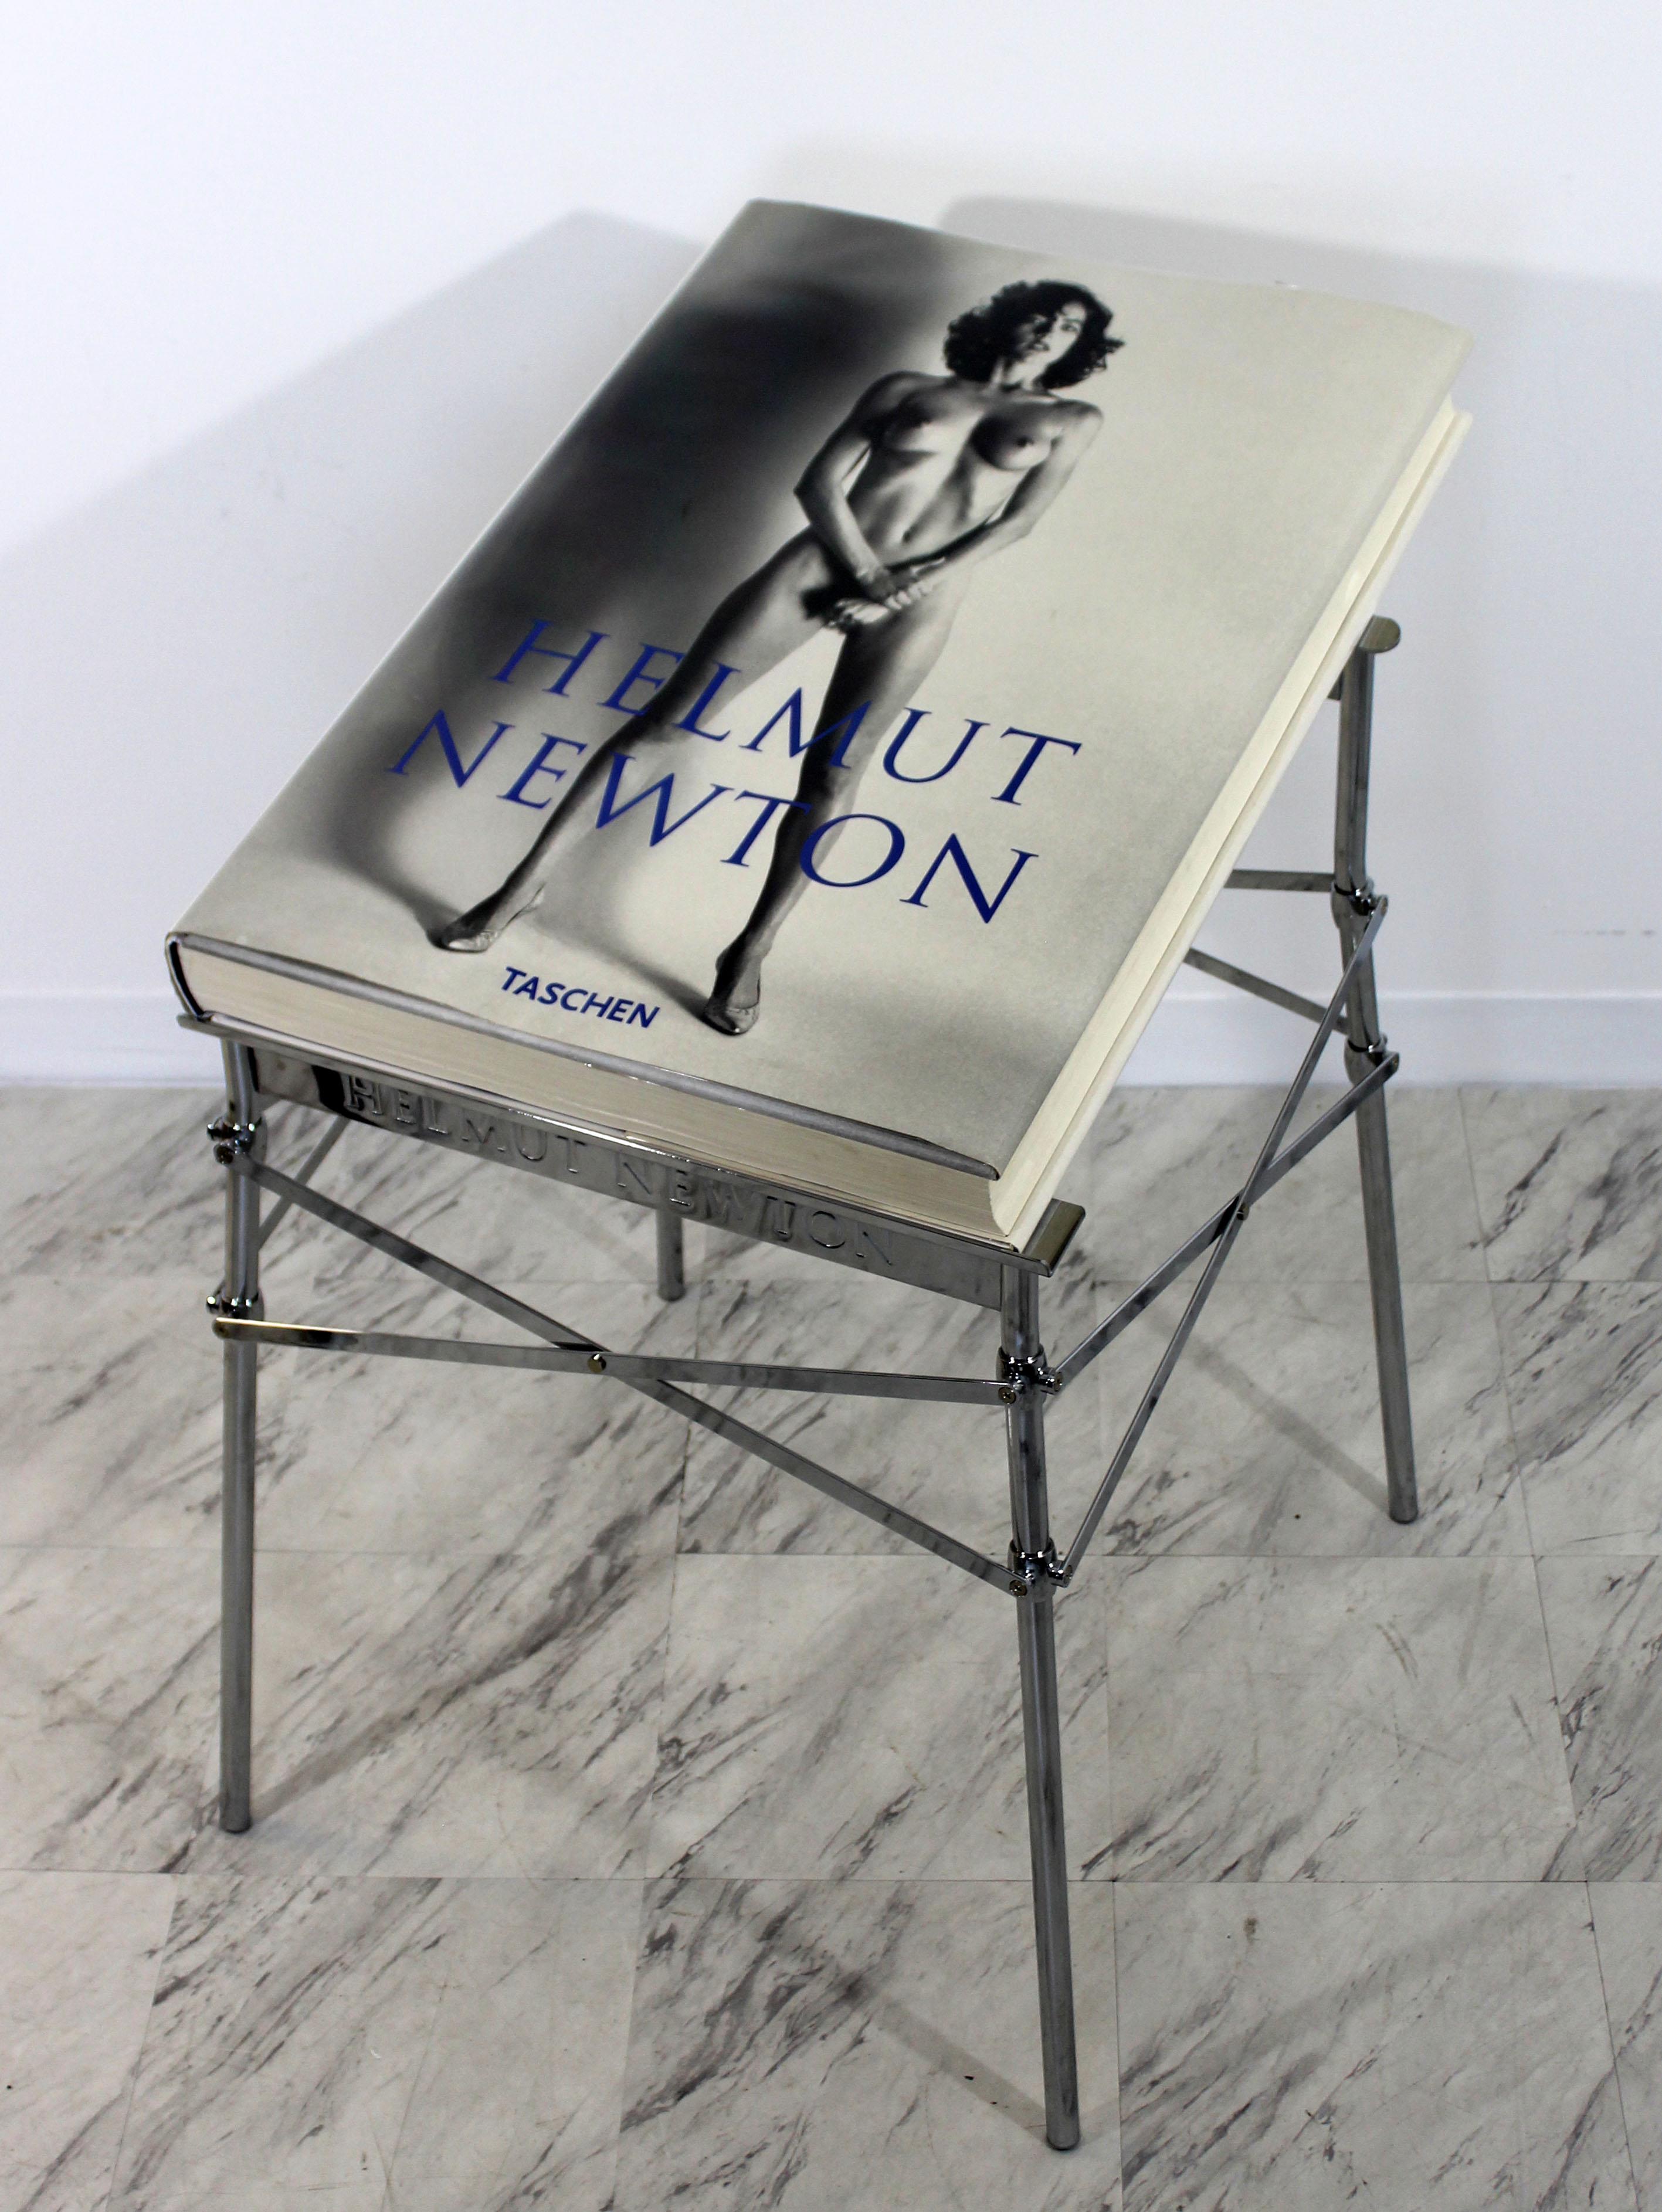 For your consideration is one of the most impressive books ever published! The 464 page, sixty six pound book is one of the largest ever created. Each of the edition was numbered, (ours is 3,114 / 10,000) and this copy was hand signed by Helmut